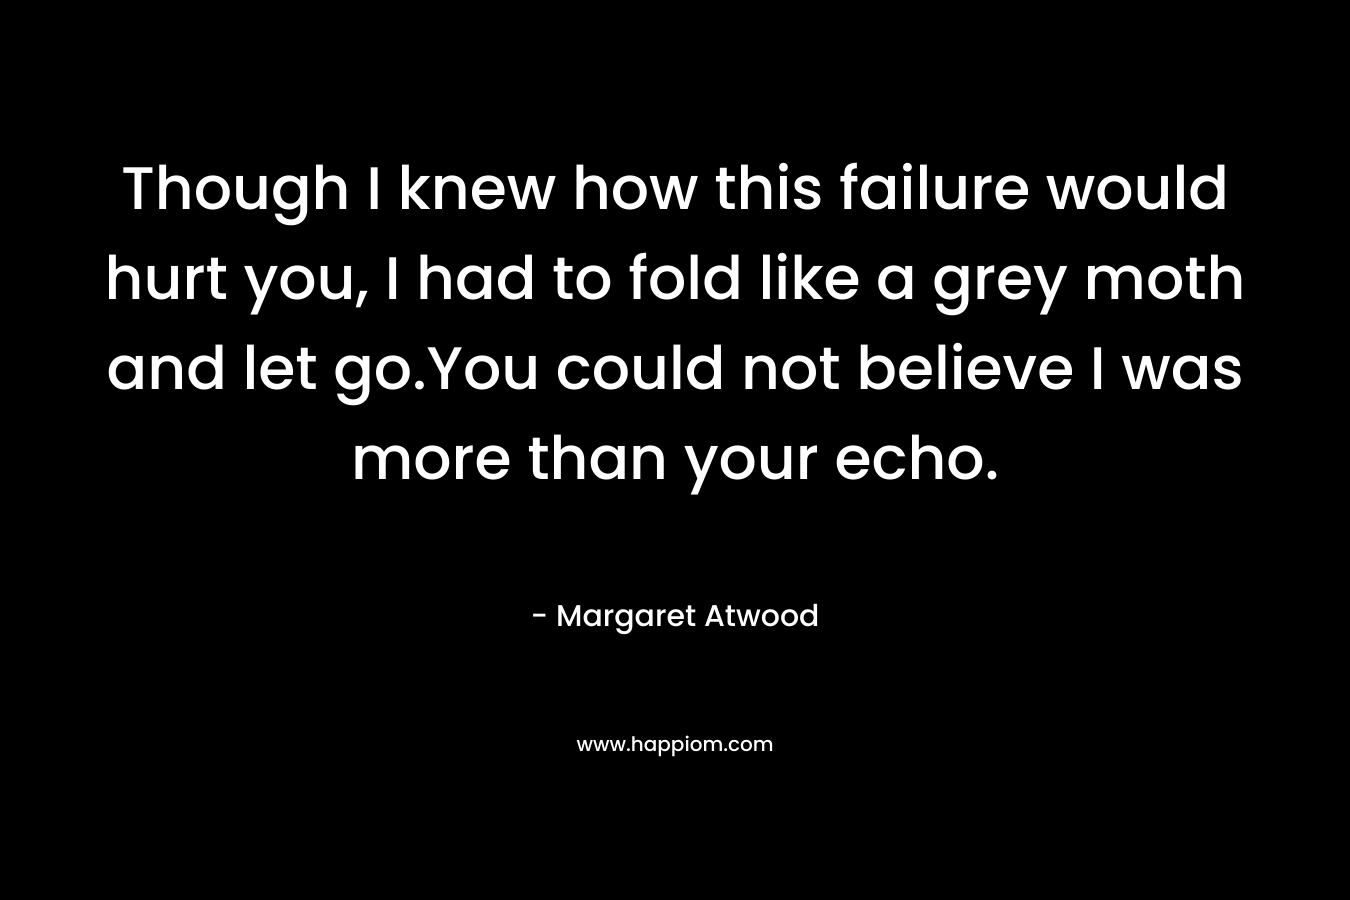 Though I knew how this failure would hurt you, I had to fold like a grey moth and let go.You could not believe I was more than your echo. – Margaret Atwood